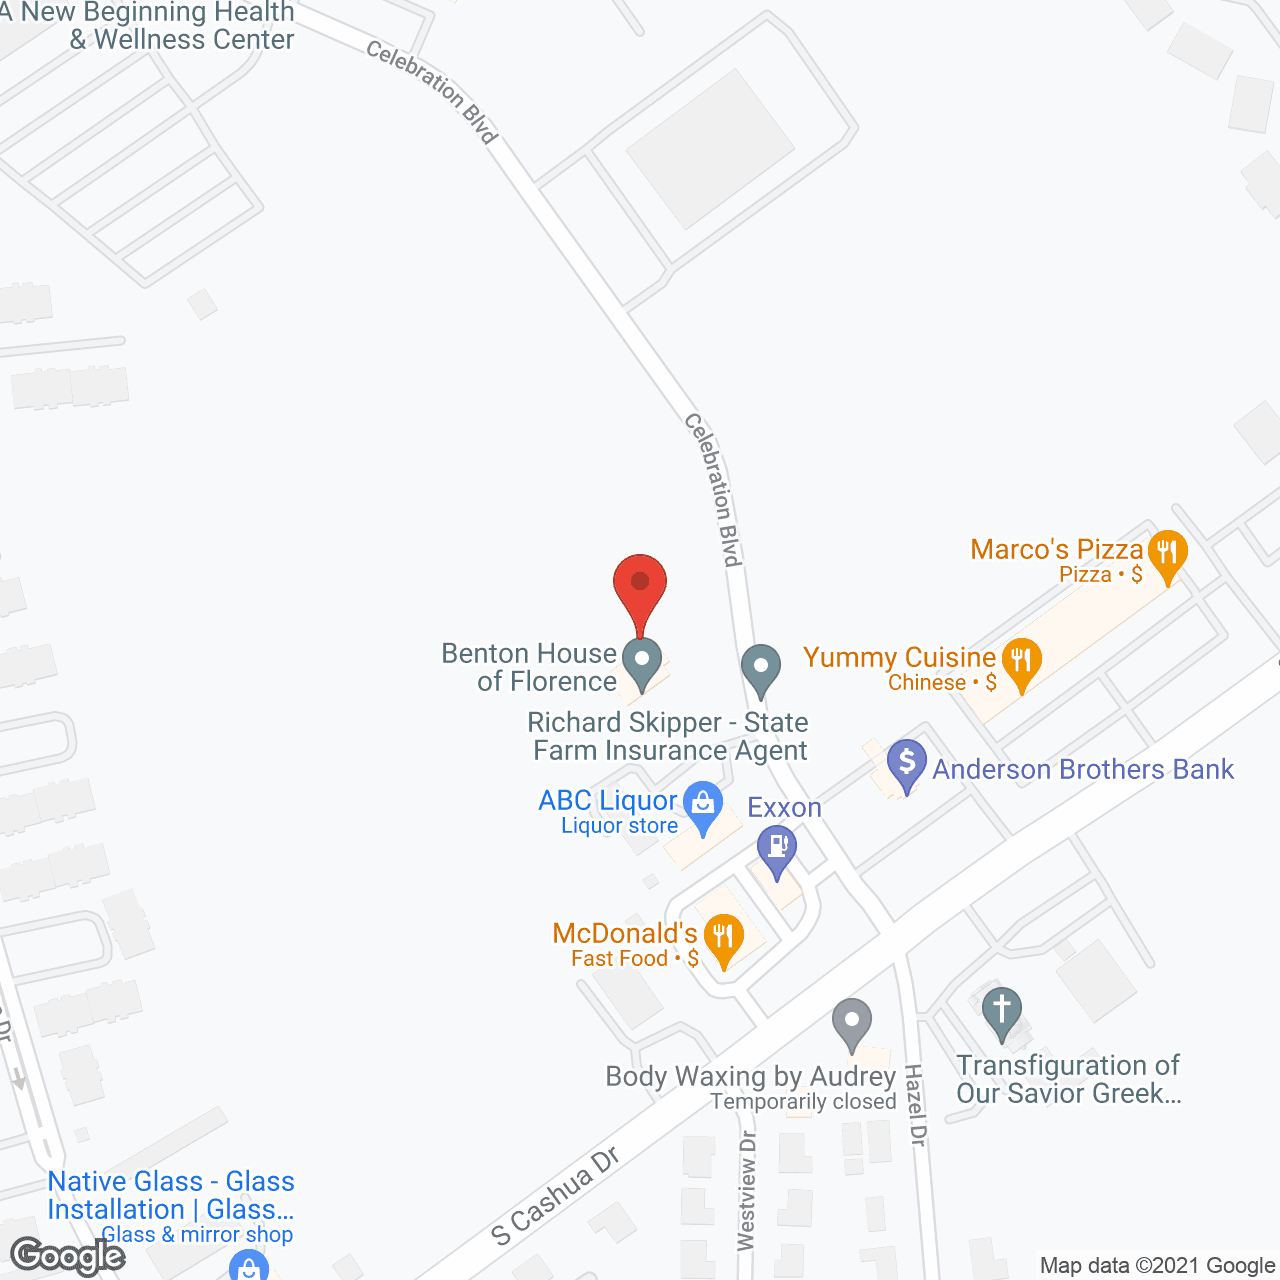 Benton House of Florence in google map